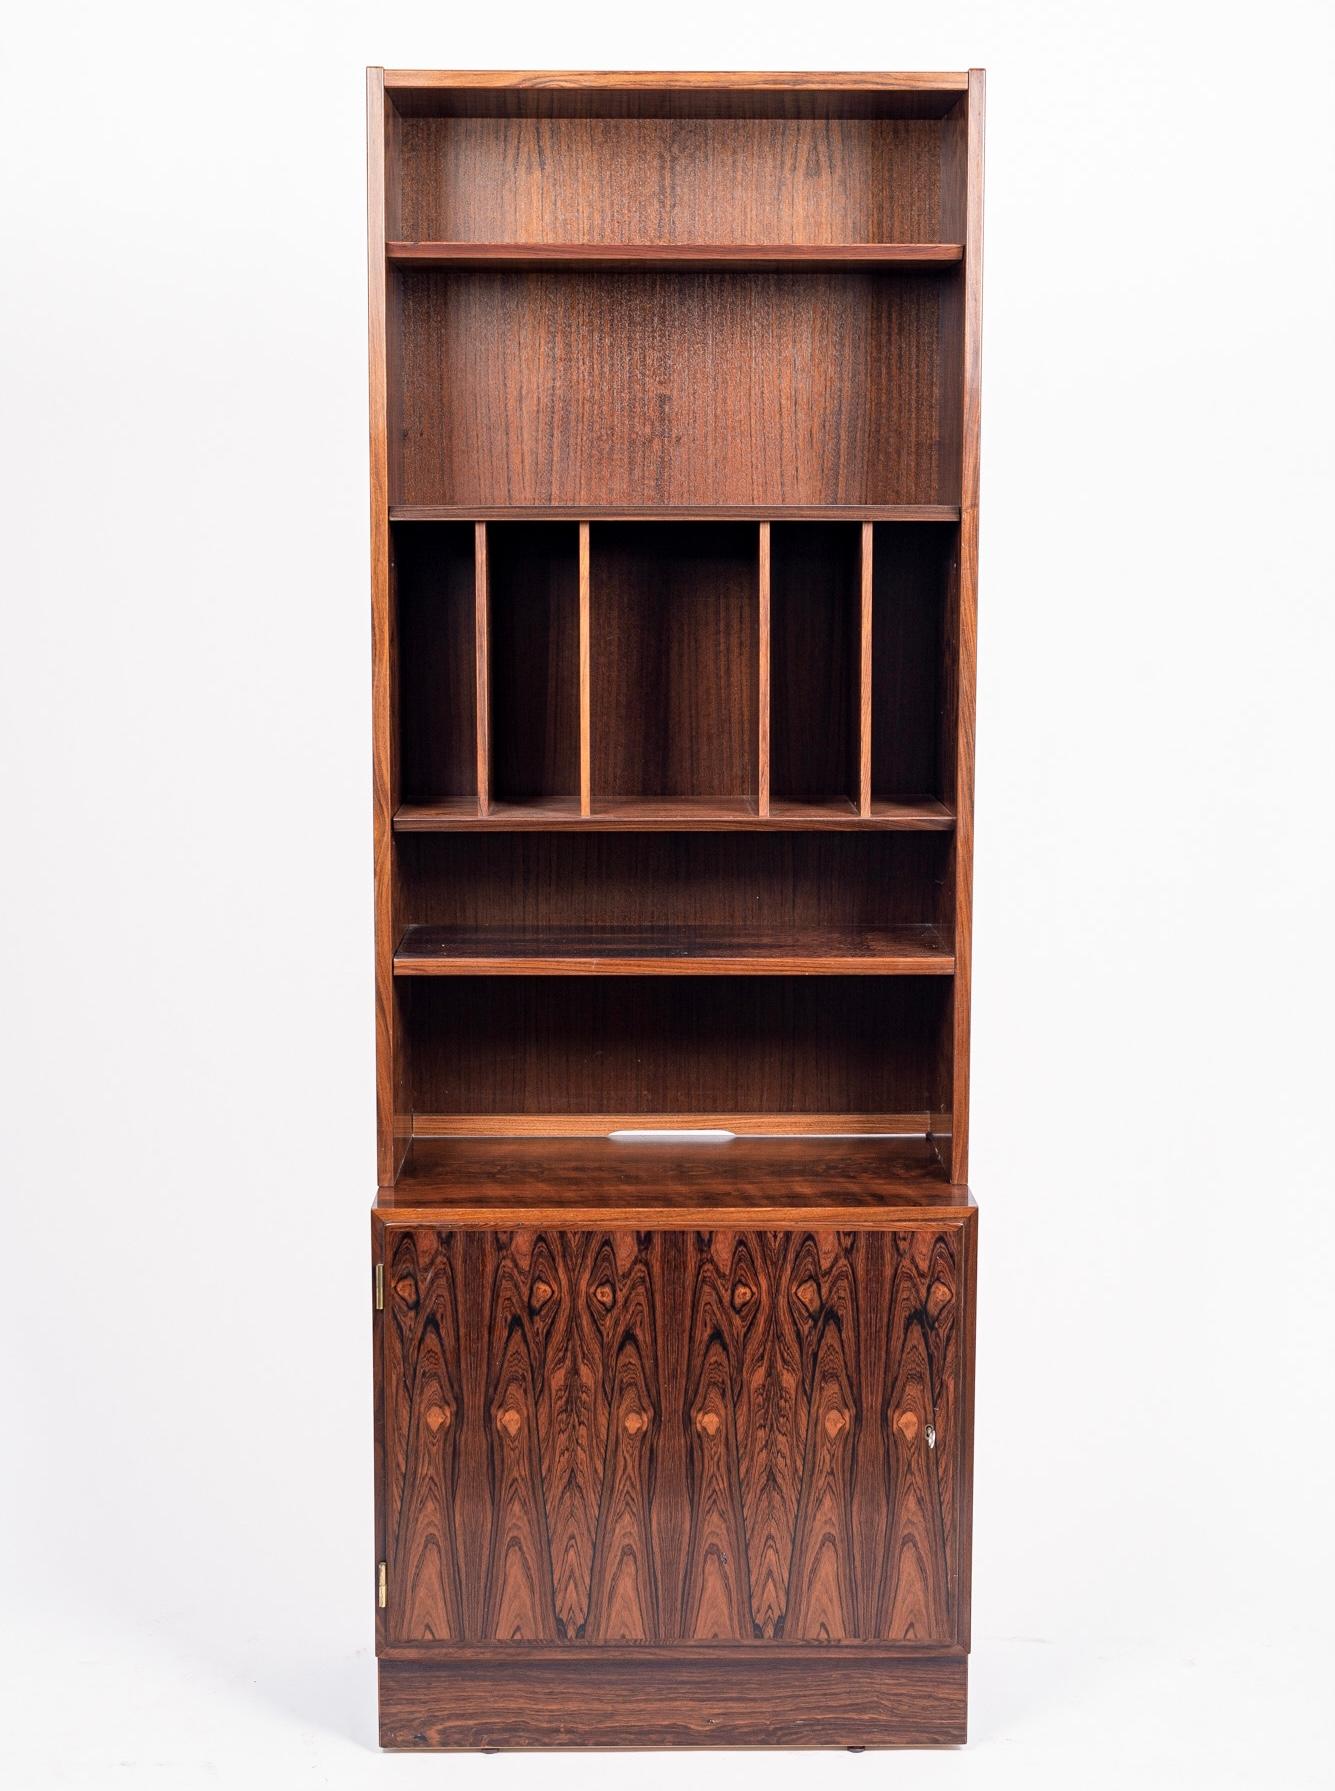 This vintage mid century Danish modern tall and slim rosewood bookcase was designed by Carlo Jensen for Hundevad & Co. and was made in Denmark circa 1960. The minimalist Scandinavian modern design features clean, geometric lines and the cabinet is